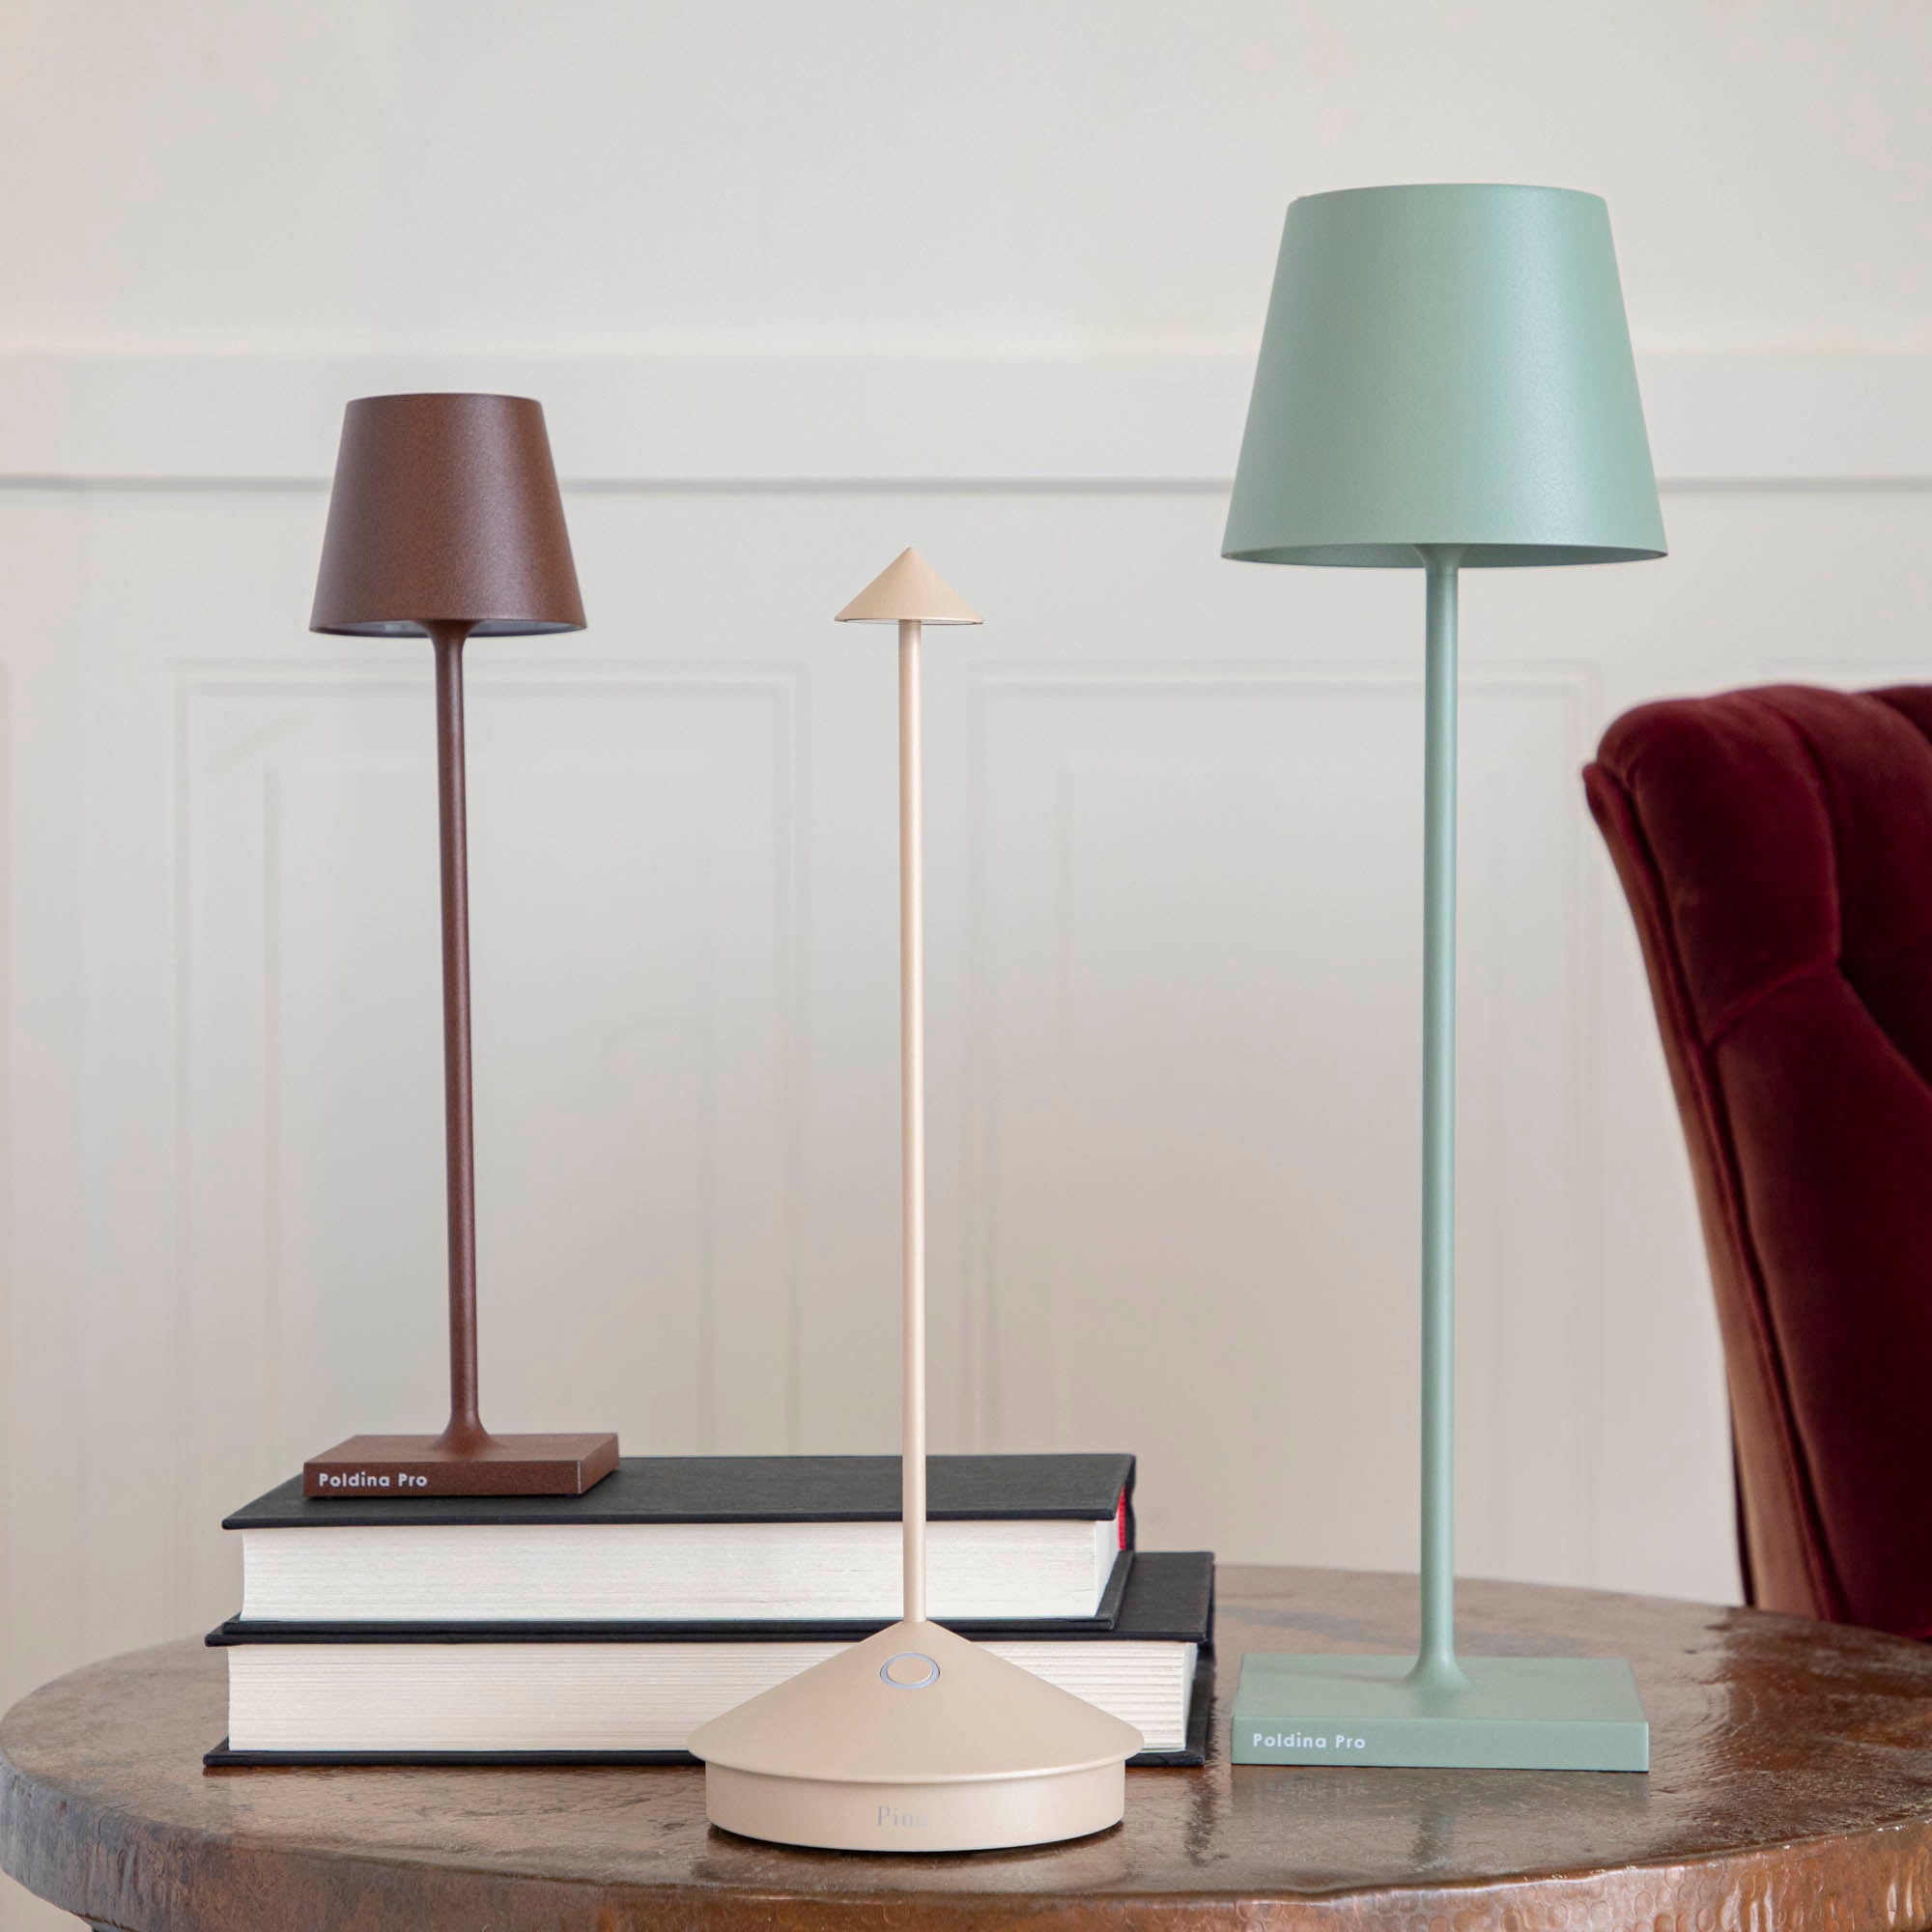 A Sage Micro Cordless Lamp by Zafferano on a table next to a book and a plant.